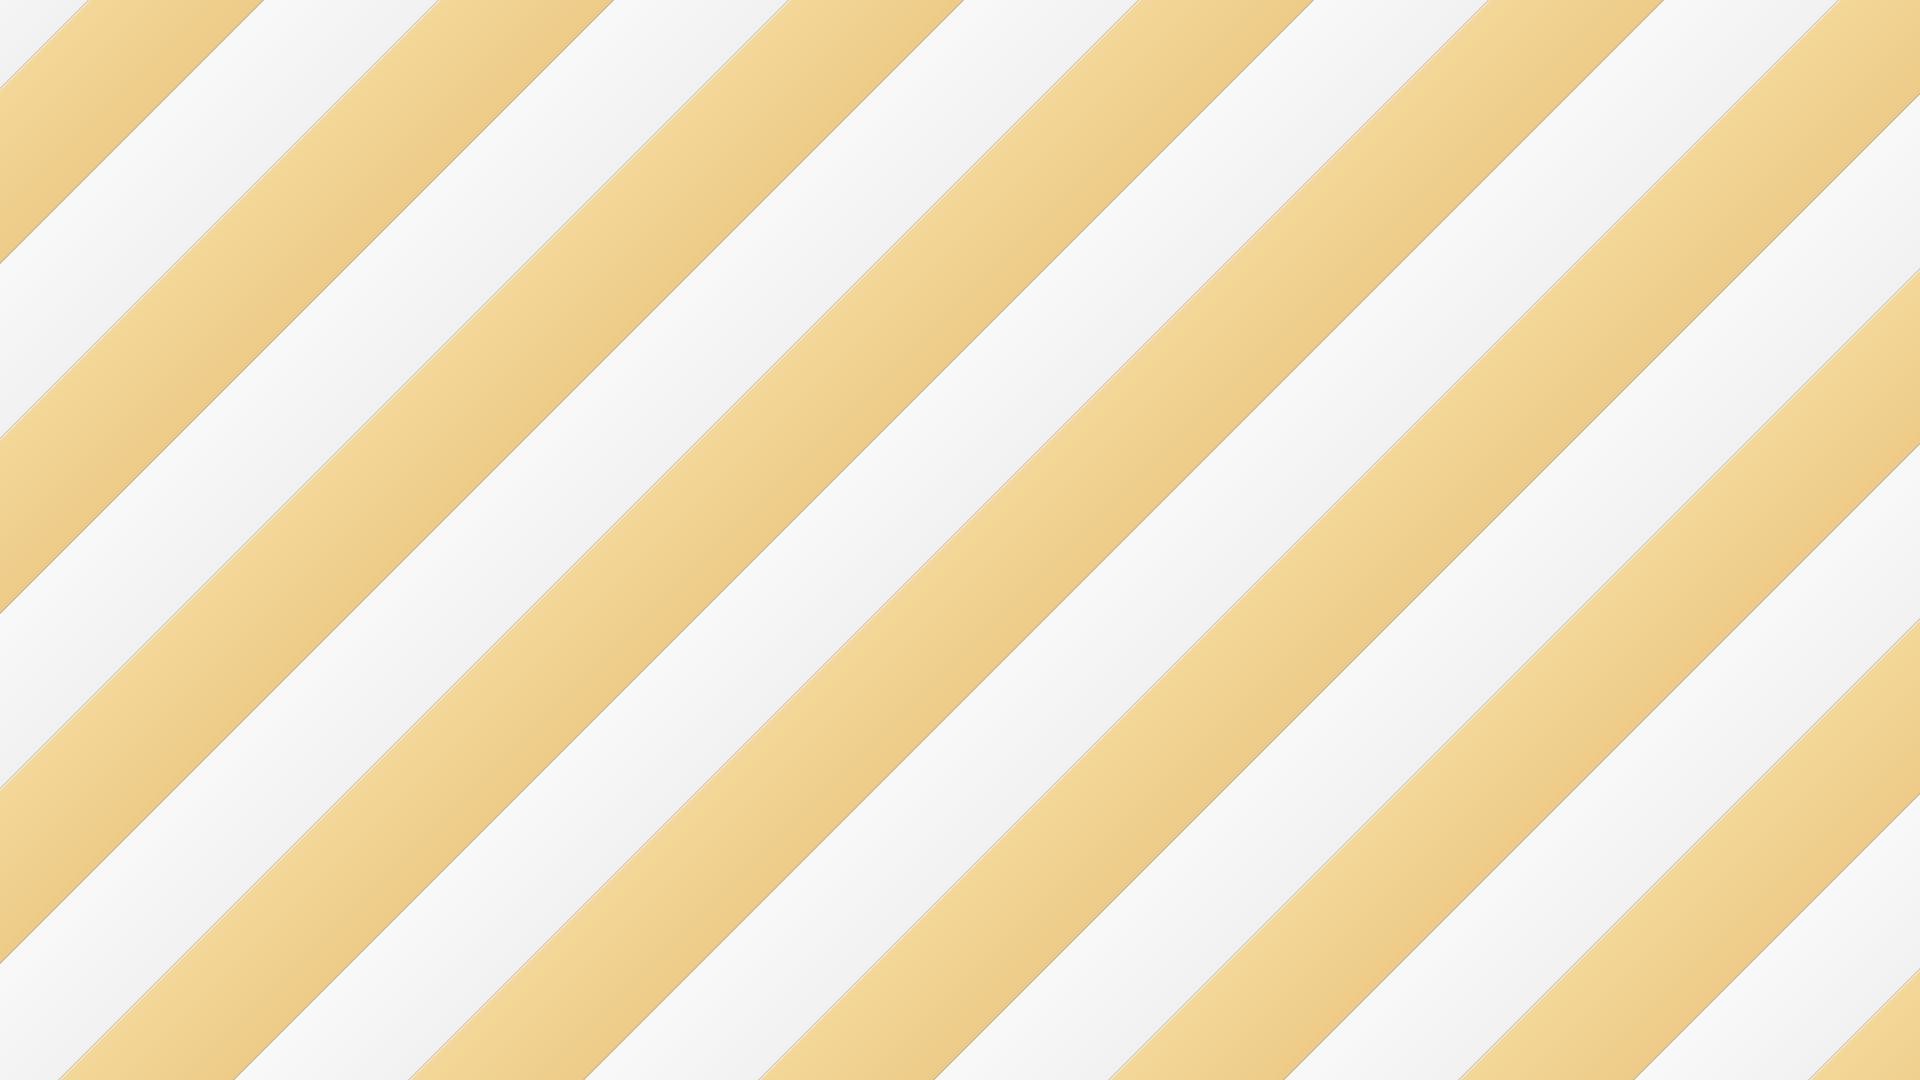 1920x1080  Yellow striped backgrounds wide wallpapers:1280x800,1440x900,1680x1050  - hd backgrounds: